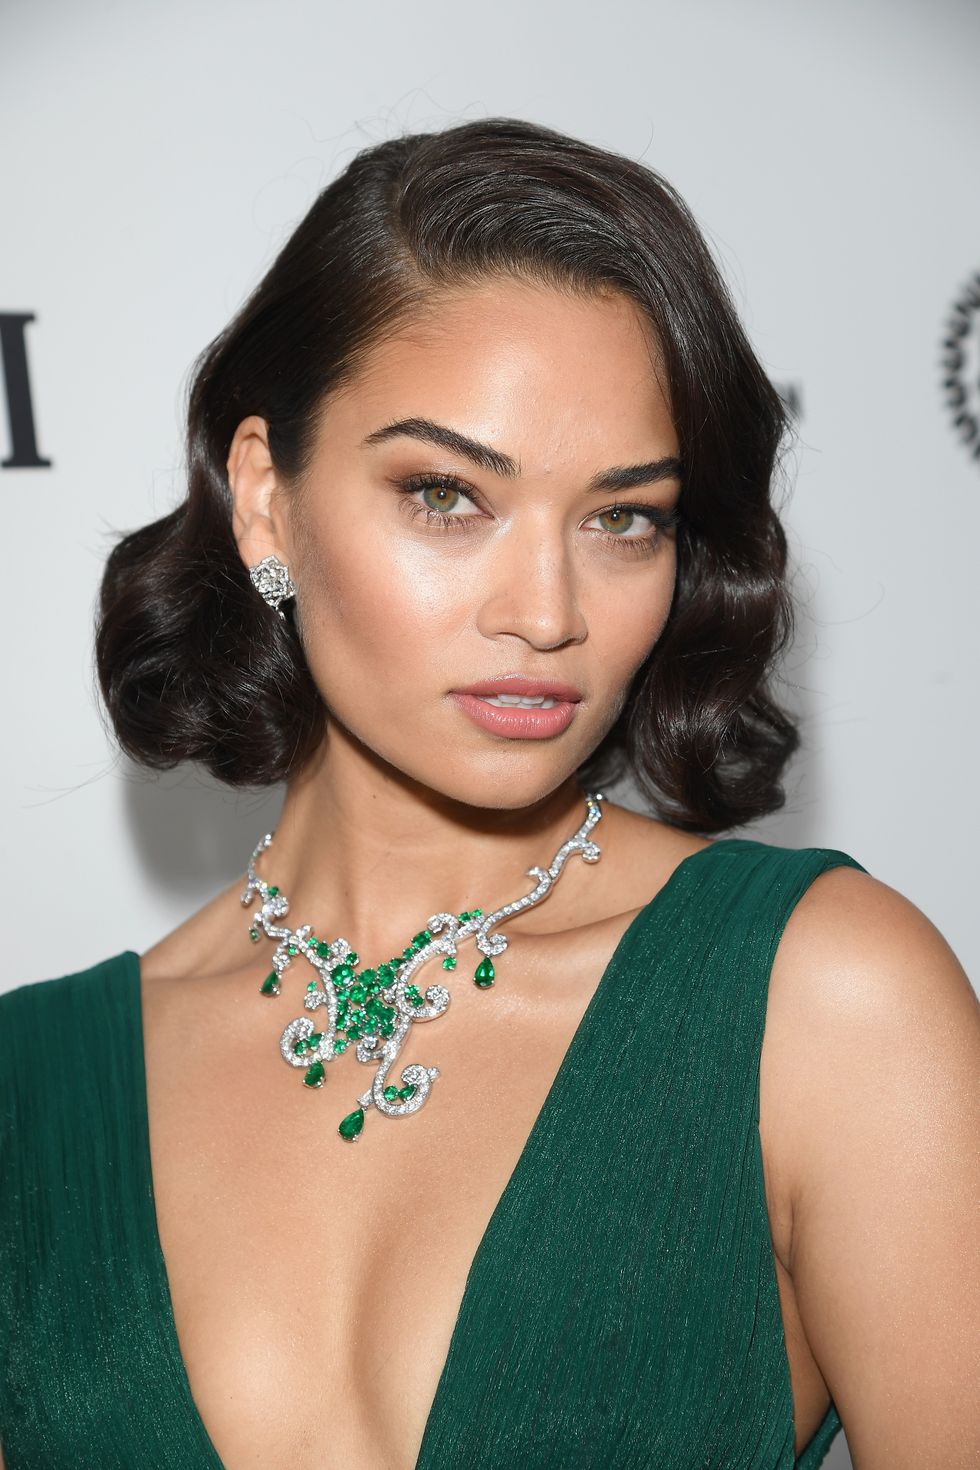 LOS ANGELES, CA - FEBRUARY 26:  Model Shanina Shaik attends Bulgari at the 25th Annual Elton John AIDS Foundation's Academy Awards Viewing Party at  on February 26, 2017 in Los Angeles, California.  (Photo by Venturelli/Getty Images for BVLGARI)